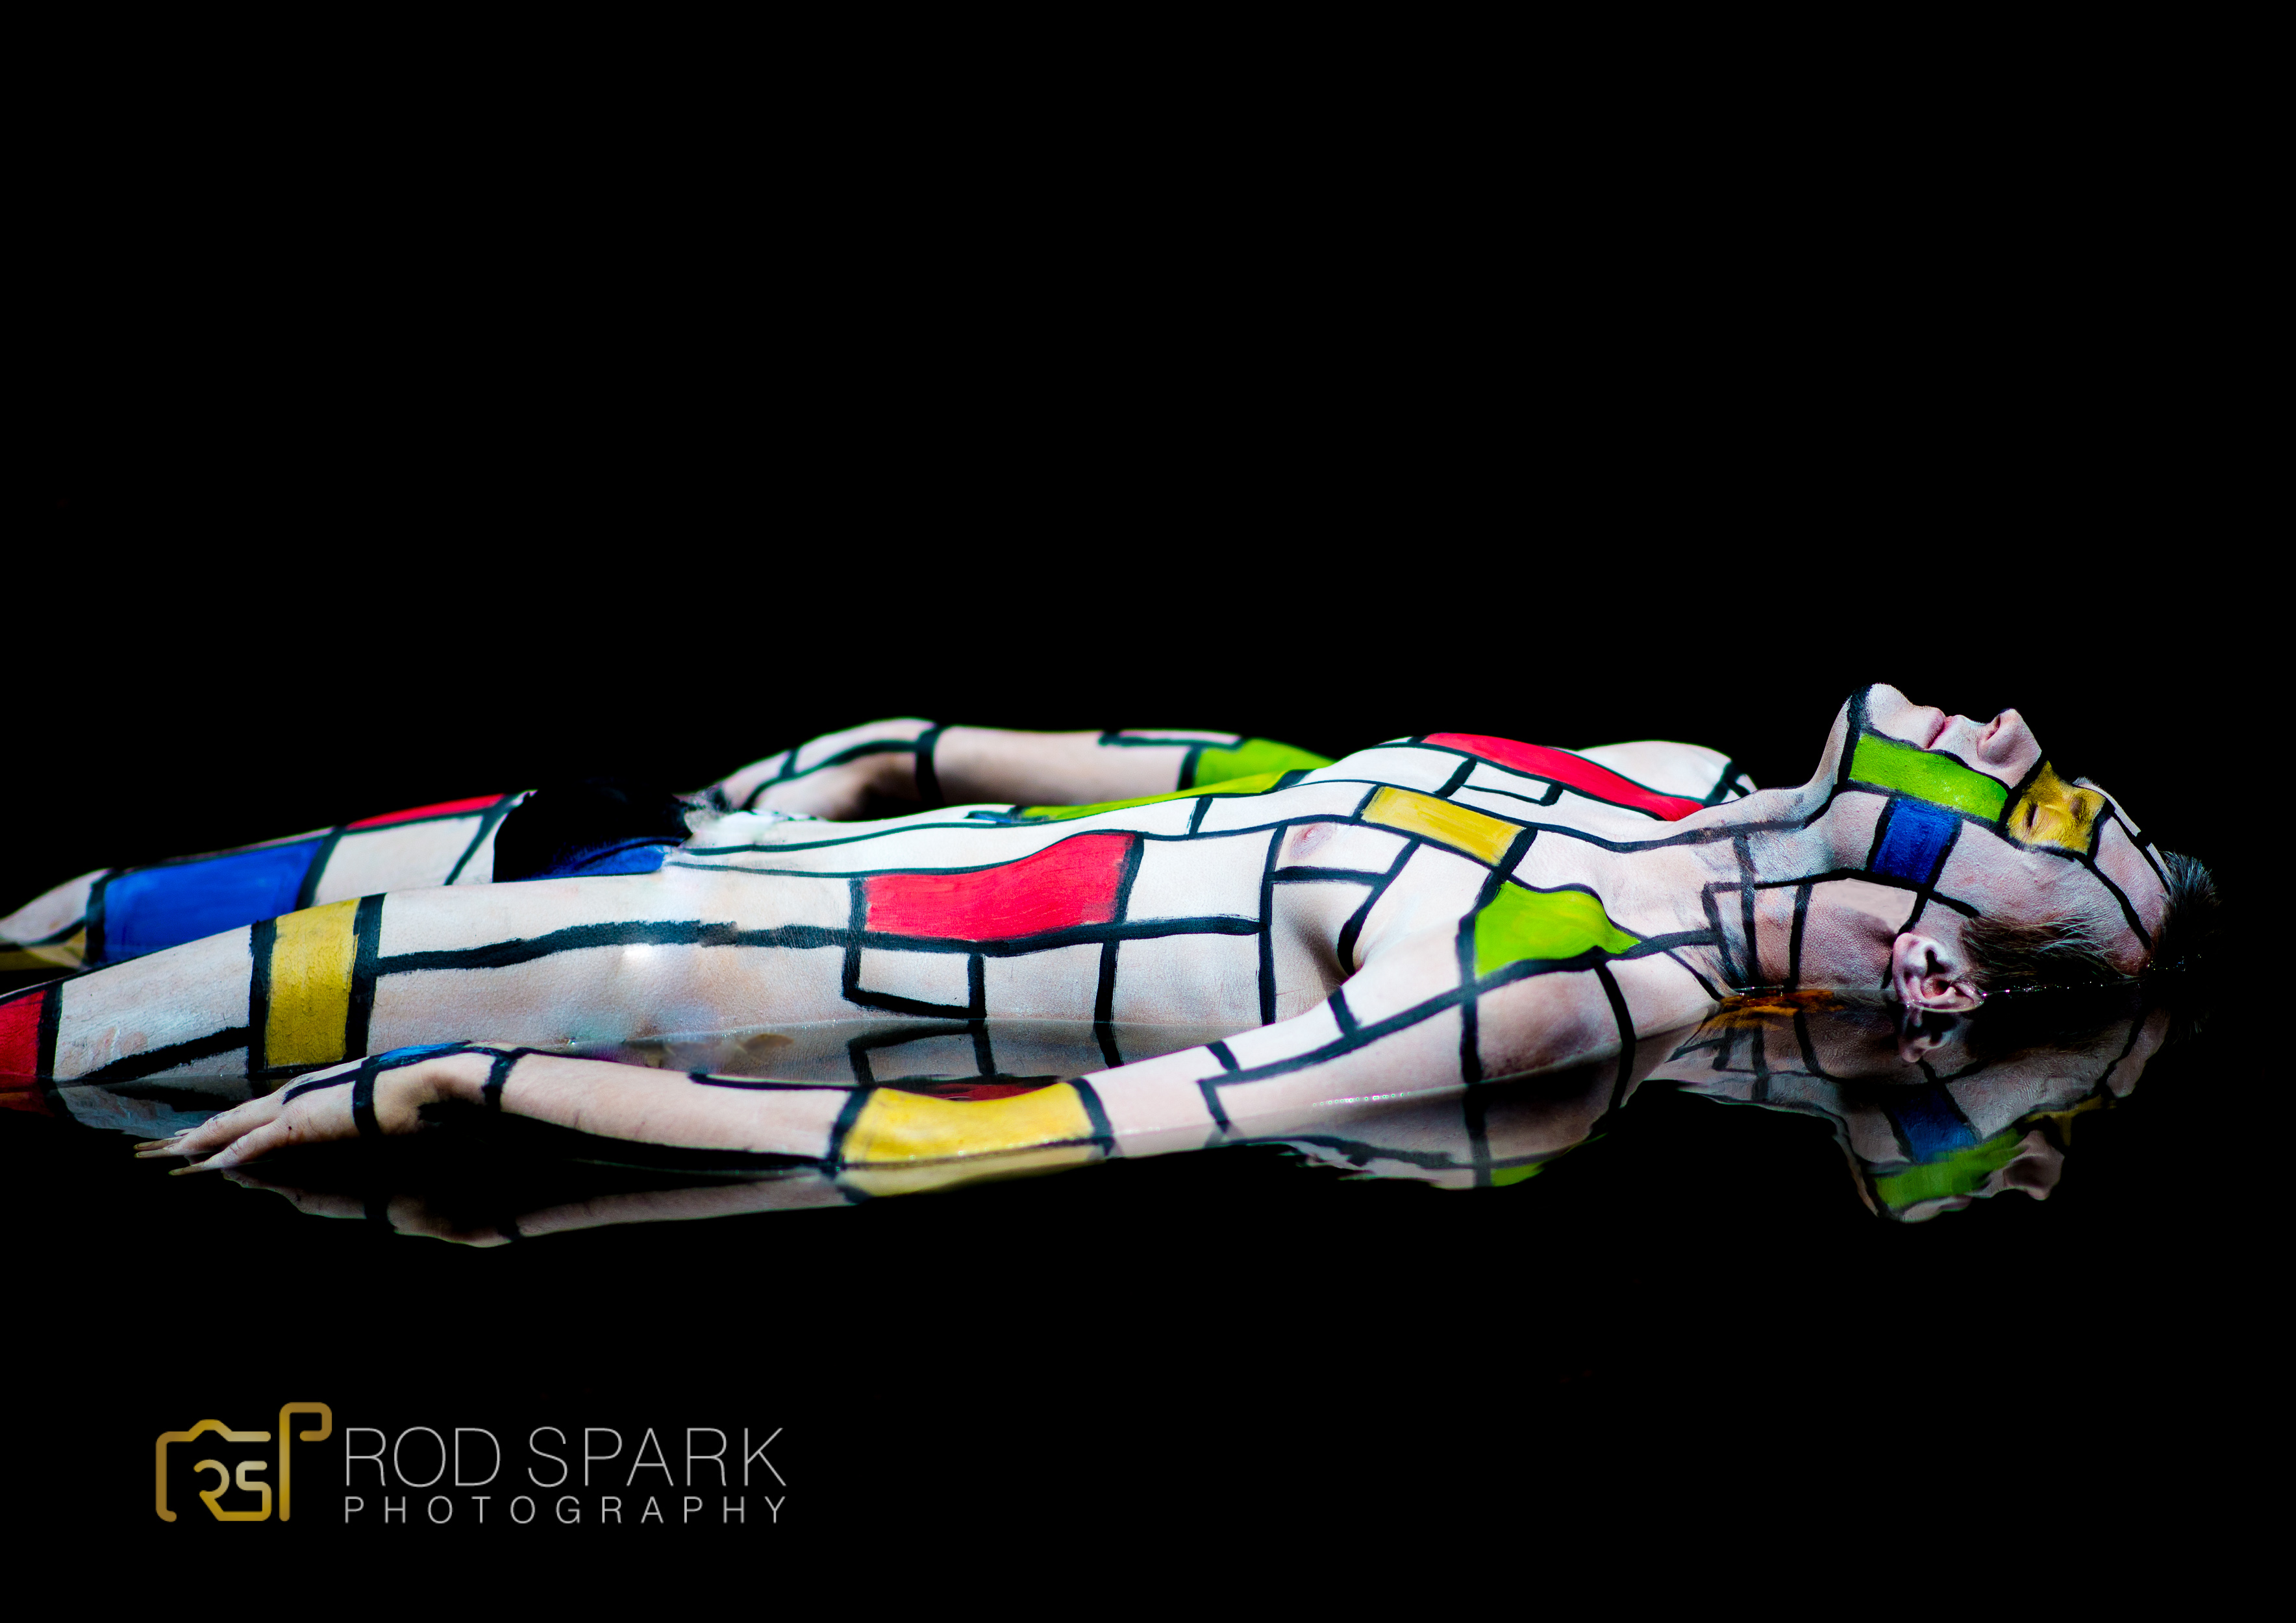 Rod Spark’s male nude body painting exhibition opens Tuesday